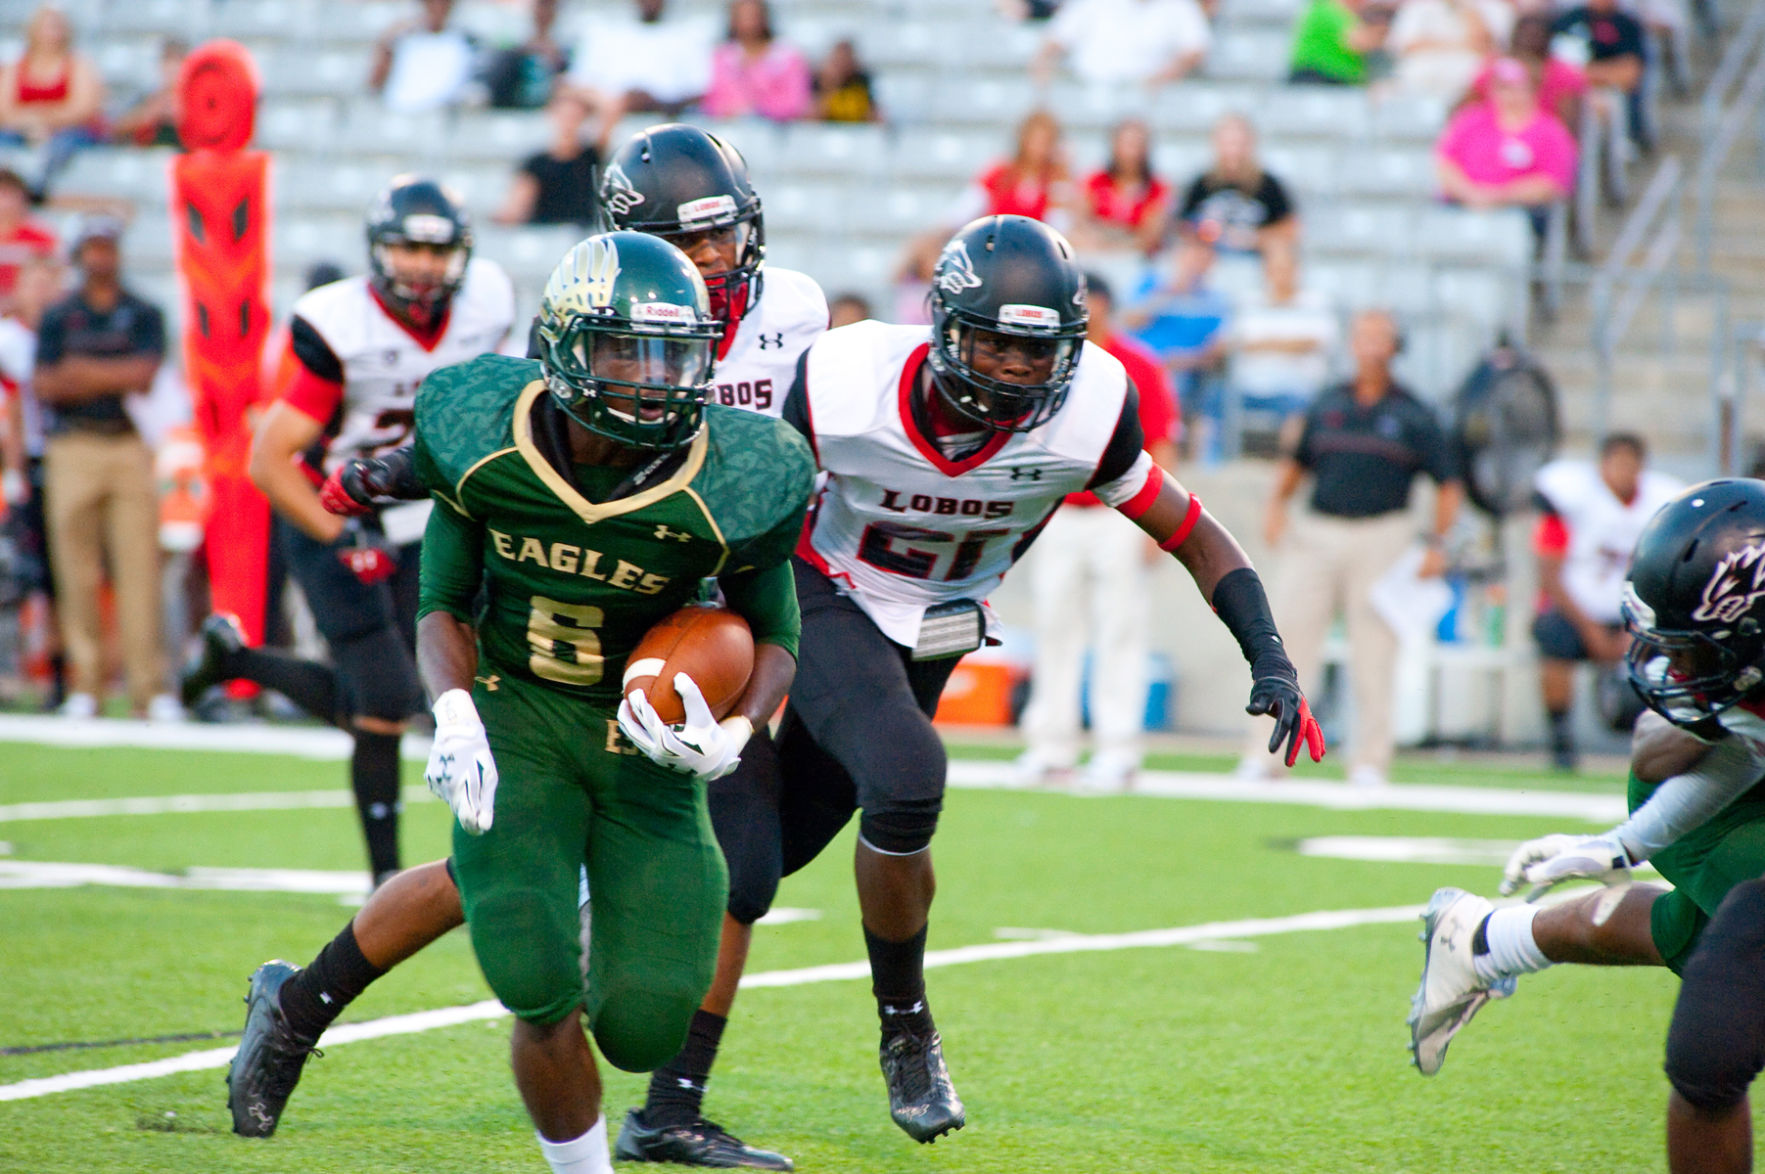 FOOTBALL: Cy Falls prepares for playoff bout with Nimitz